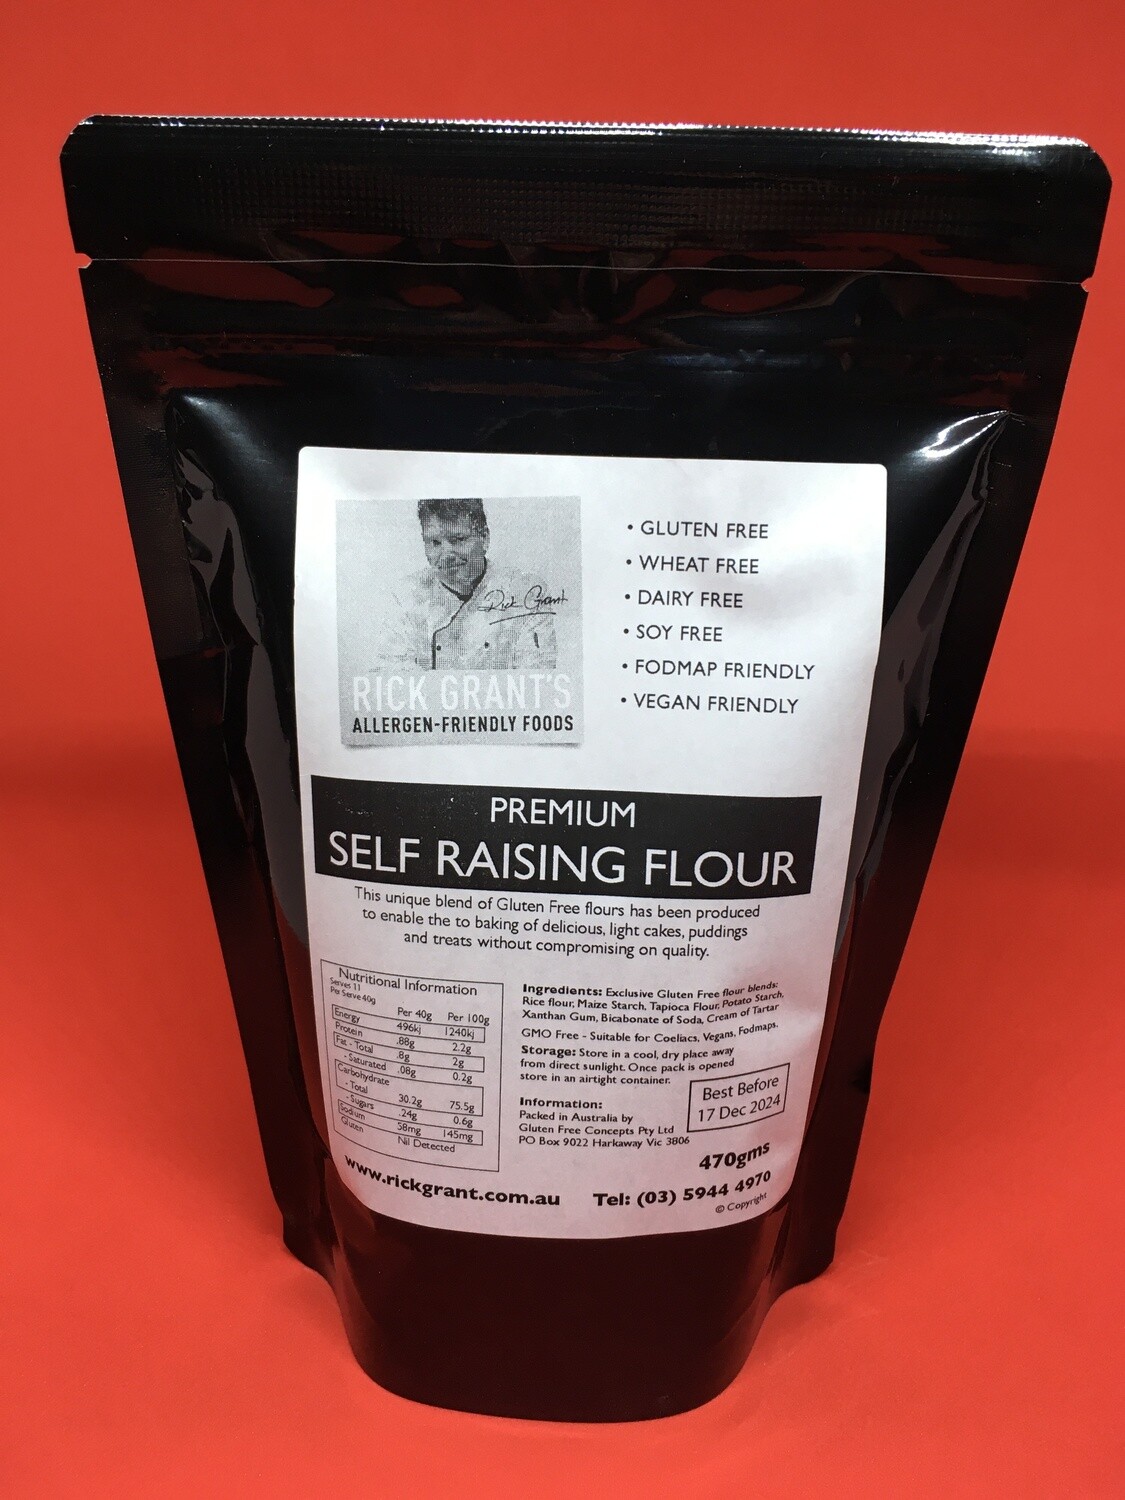 NEW TO THE STORE!
Premium Gluten Free Self Raising Flour can be used for cakes, slices & muffins!